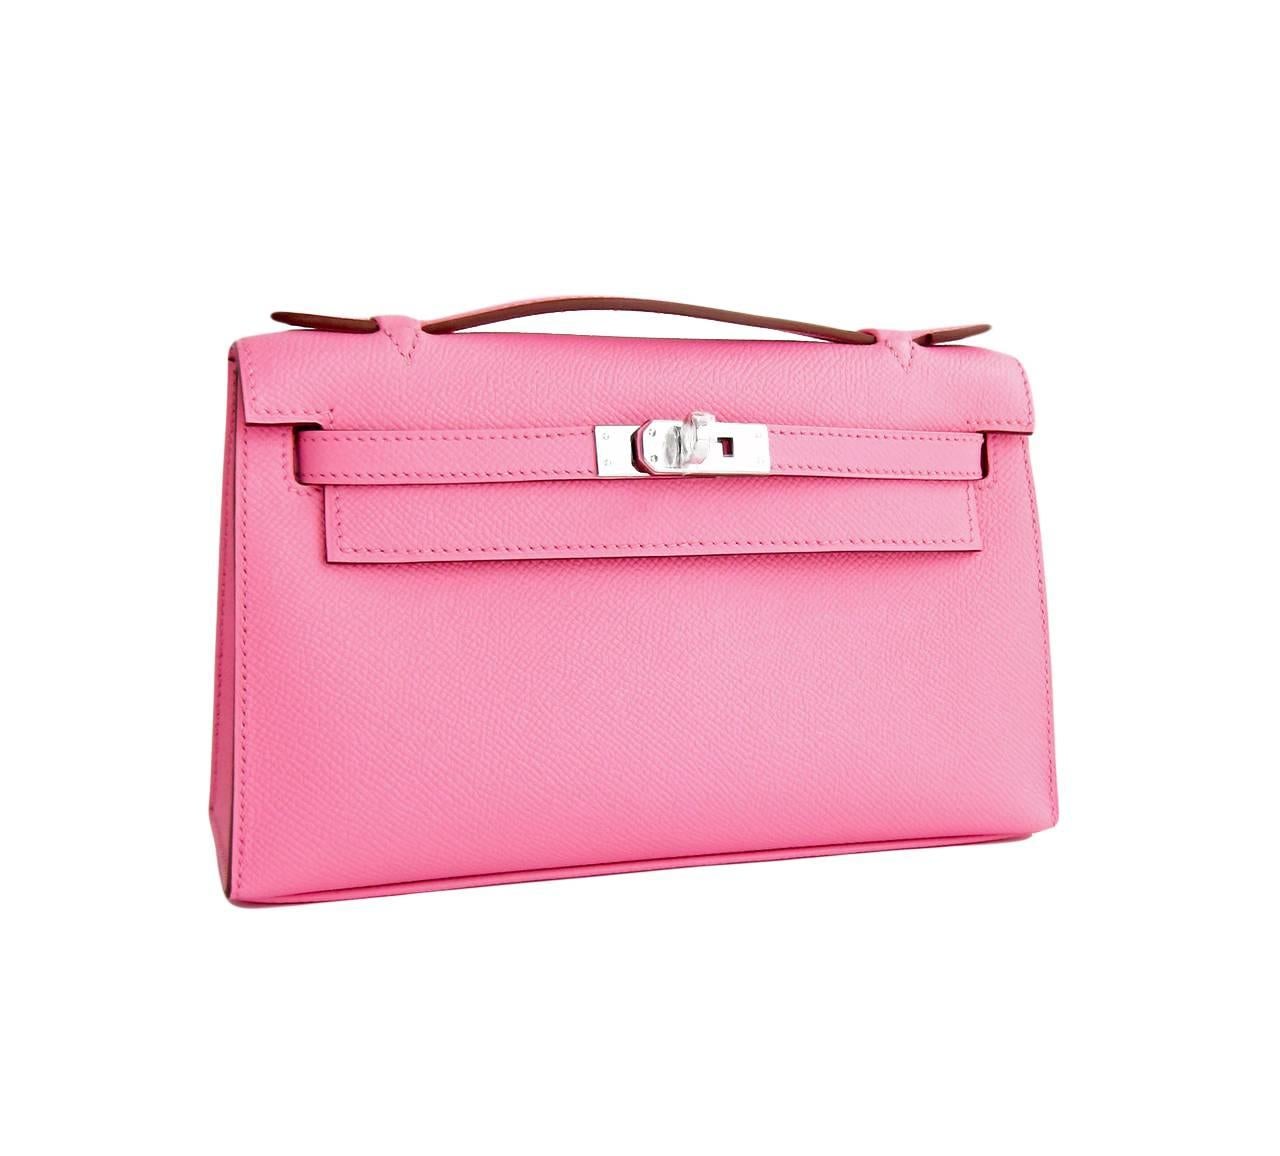 Hermes Rose Confetti Pink Epsom Kelly Pochette Clutch Bag Love  
Brand New in Box.  Store fresh.  Pristine condition (with plastic on hardware).  
Perfect gift!  Coming in full set with Hermes sleeper, box and ribbon.
This precious Kelly Pochette